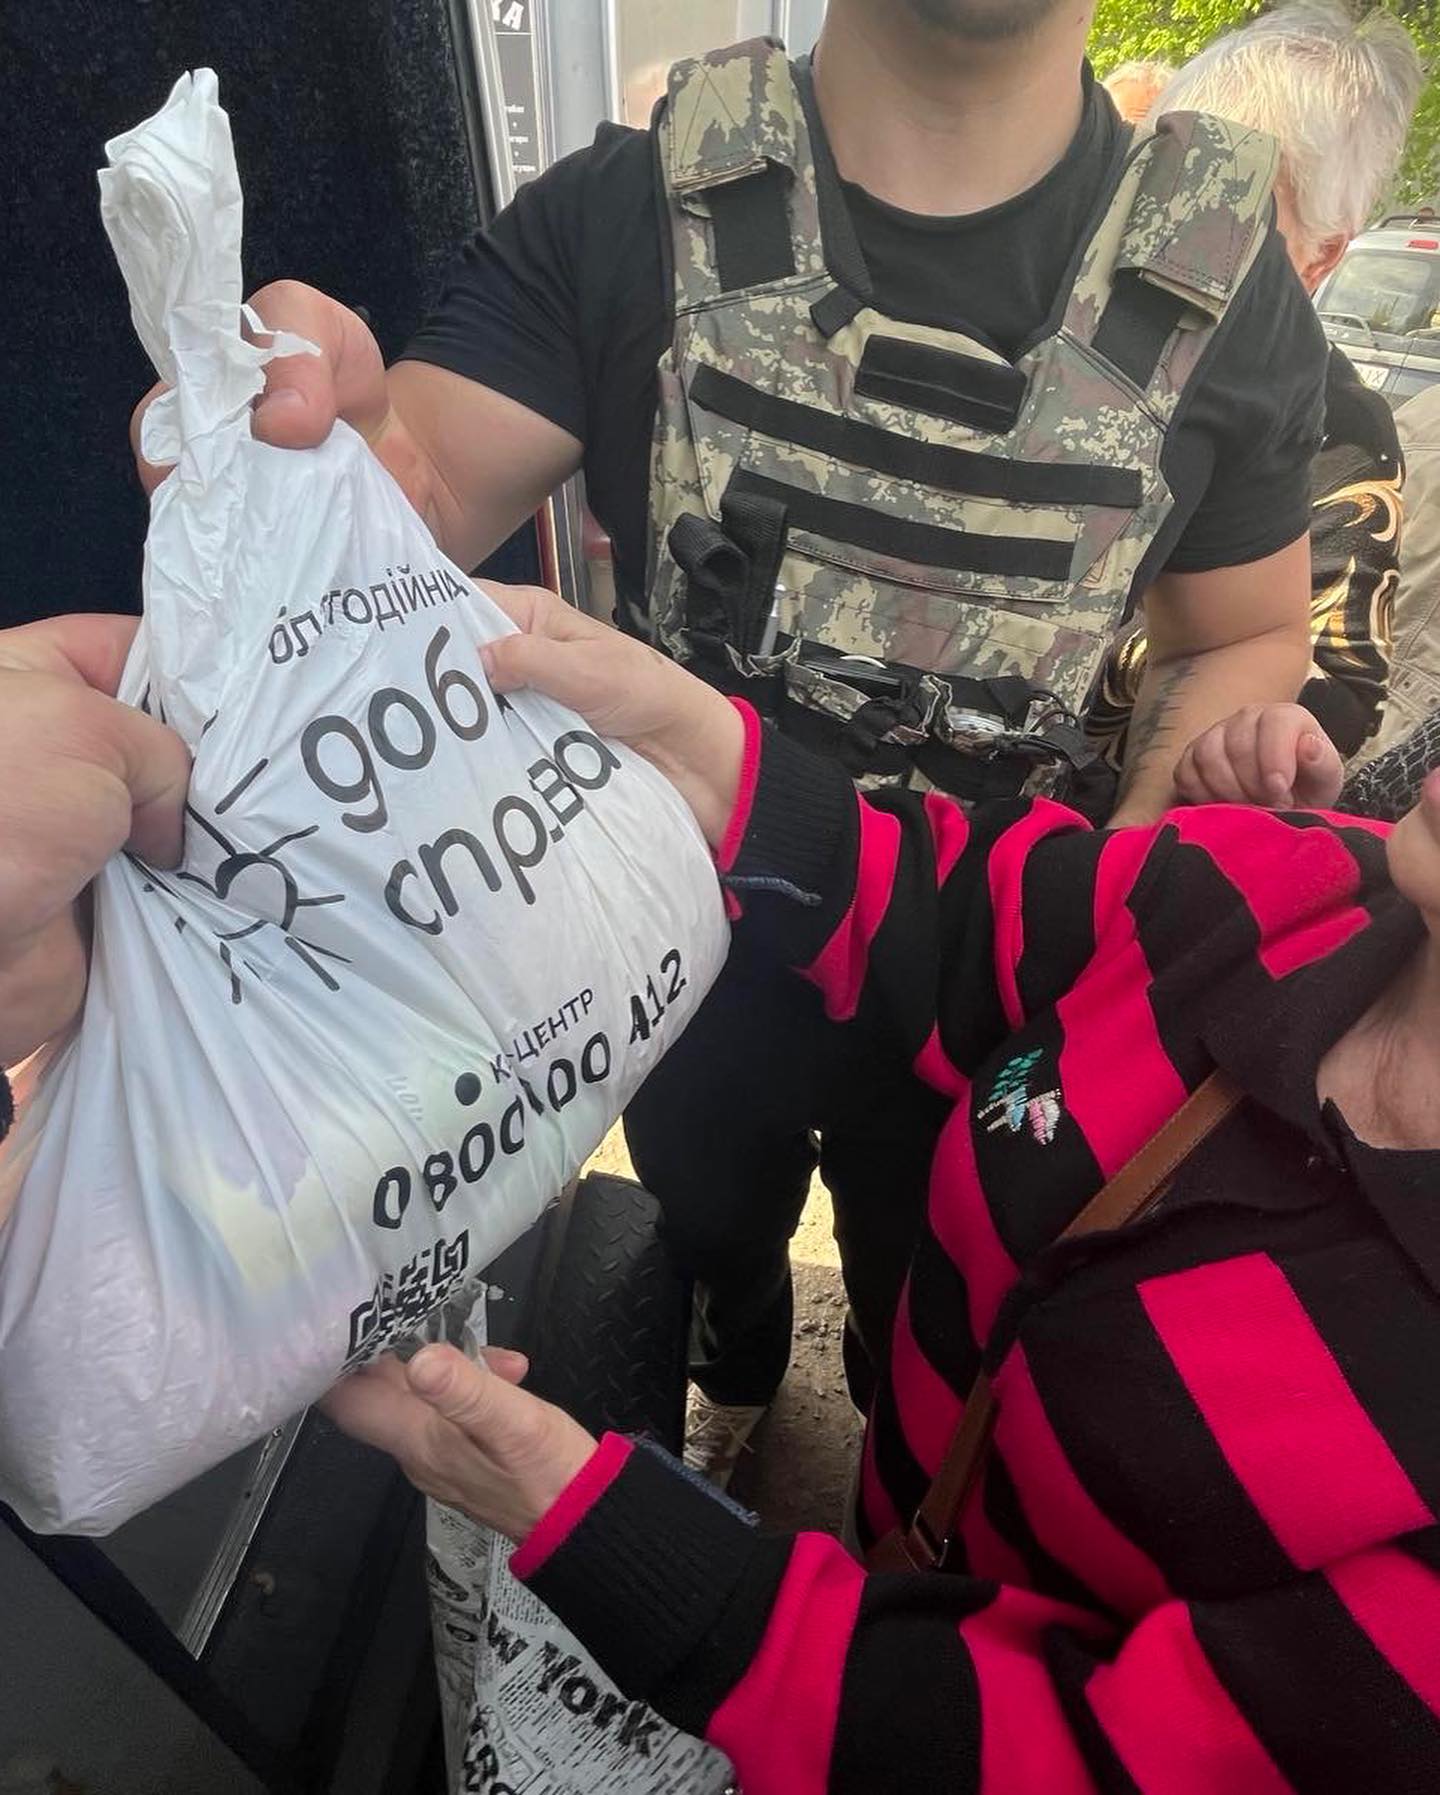 A person in a bulletproof vest hands a plastic bag marked in Cyrillic, containing humanitarian aid, to another person in a pink and black striped jacket.